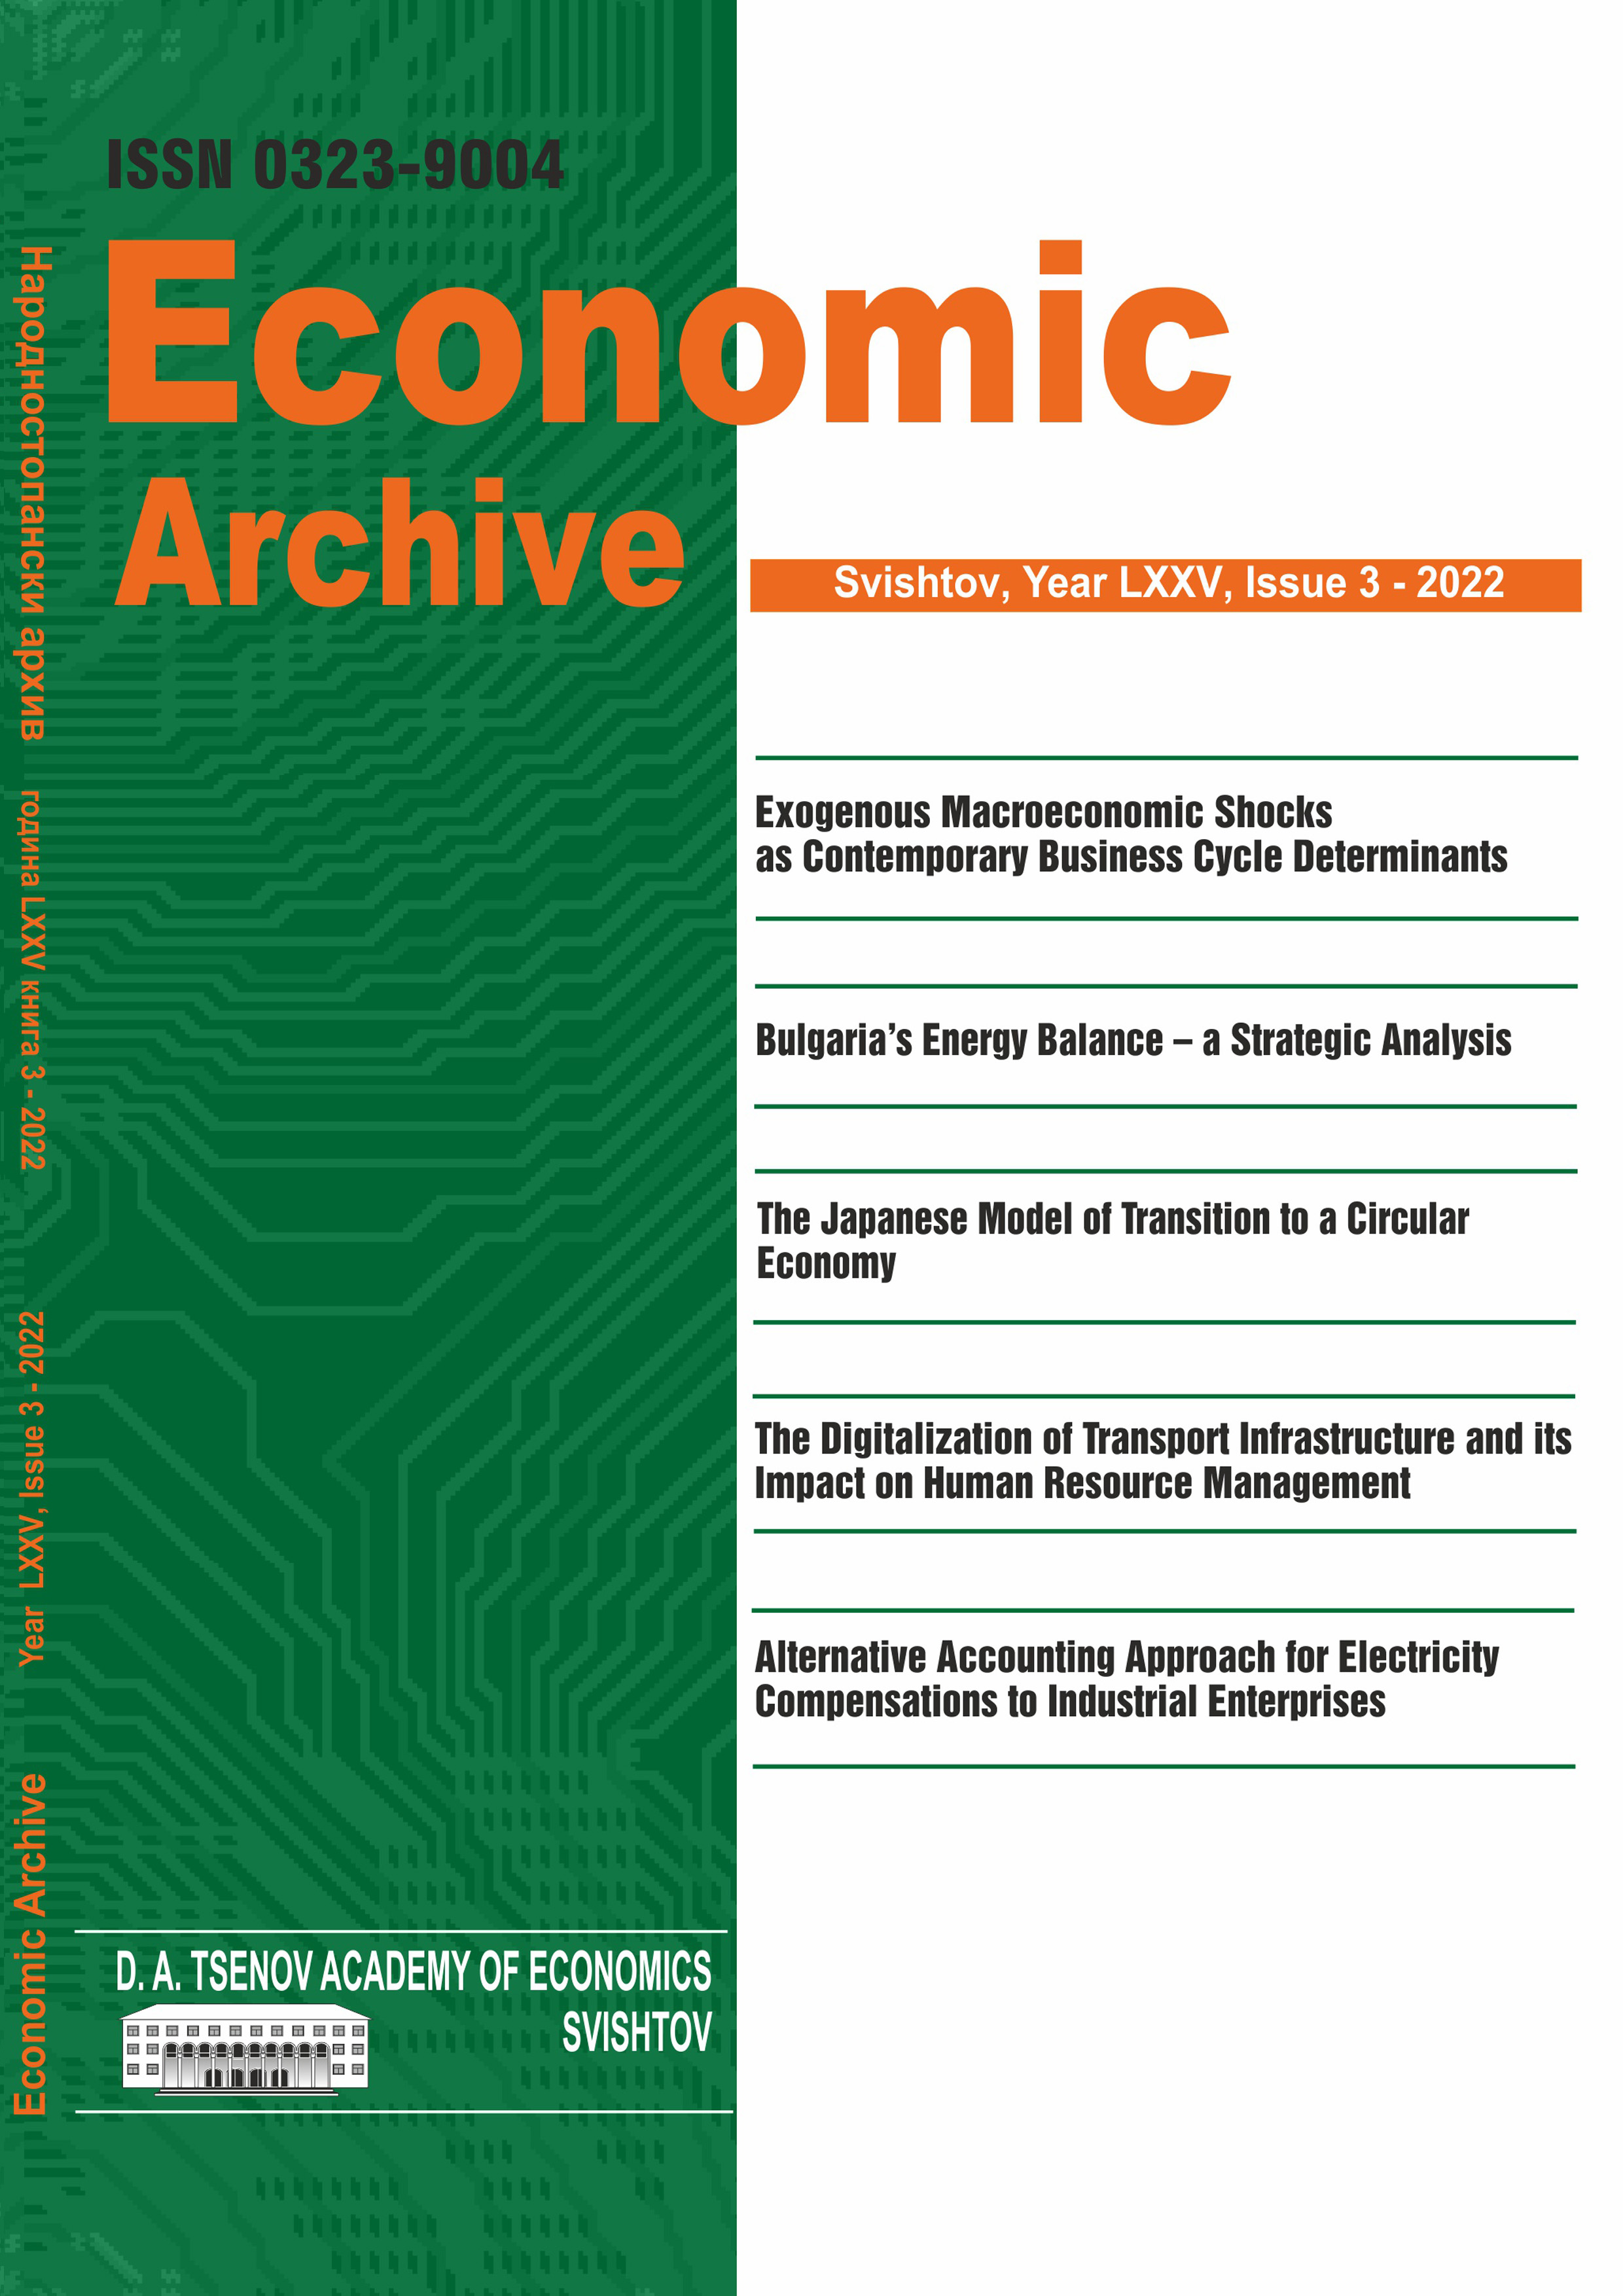 Alternative Accounting Approach For Electricity Compensations To Industrial Enterprises Cover Image